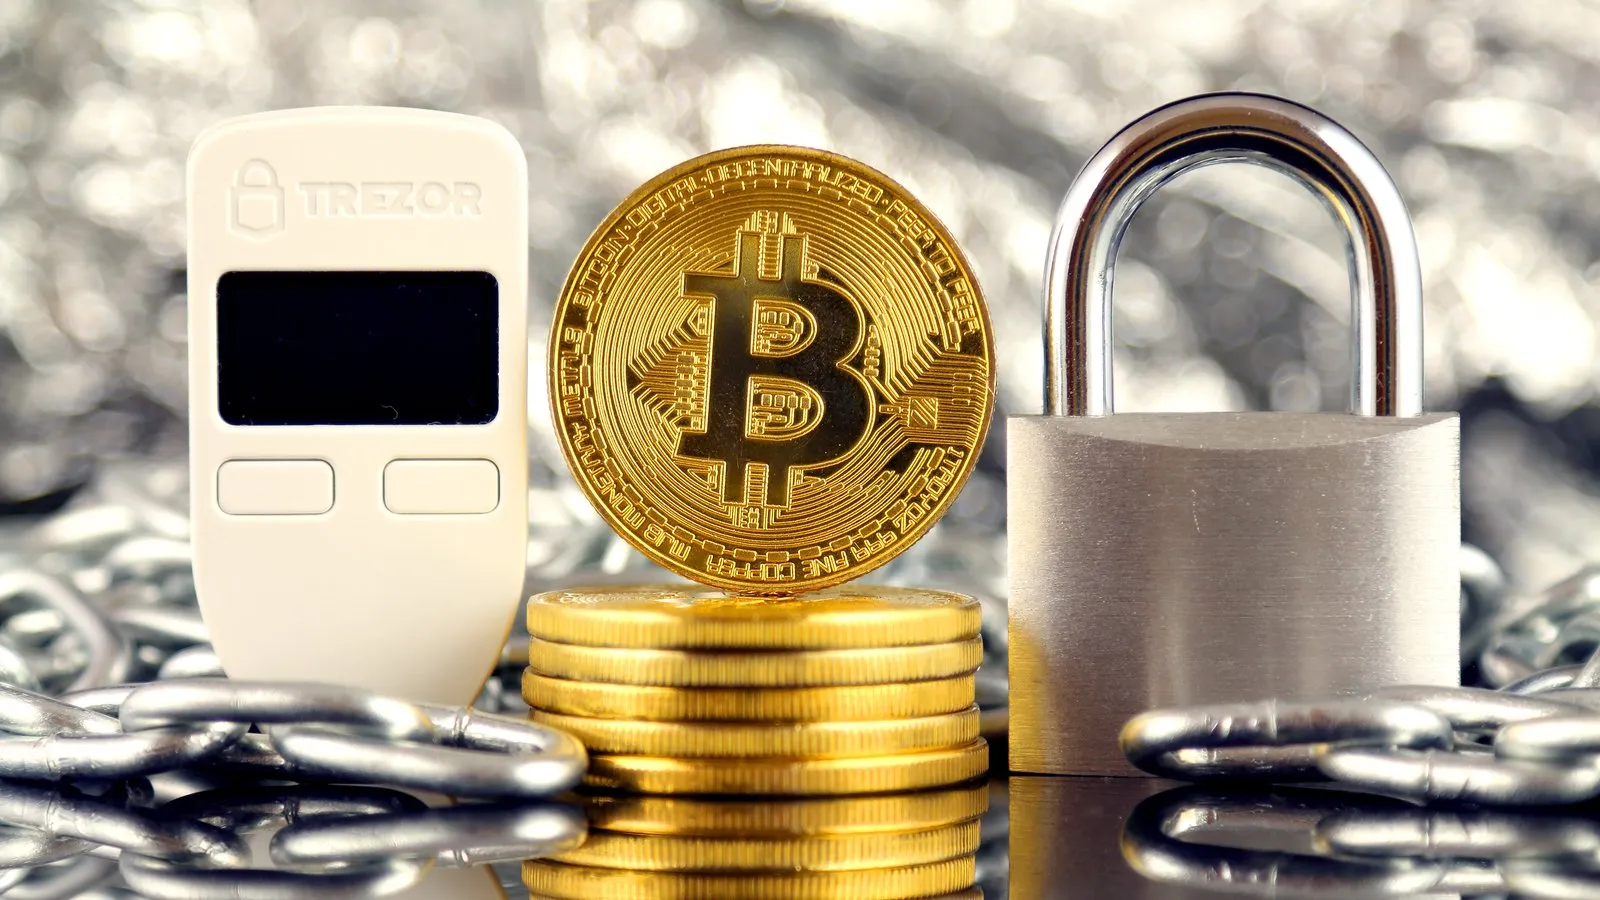 Trezor Safe 3 Review: A Hardware Wallet for Bitcoin Newcomers - Decrypt